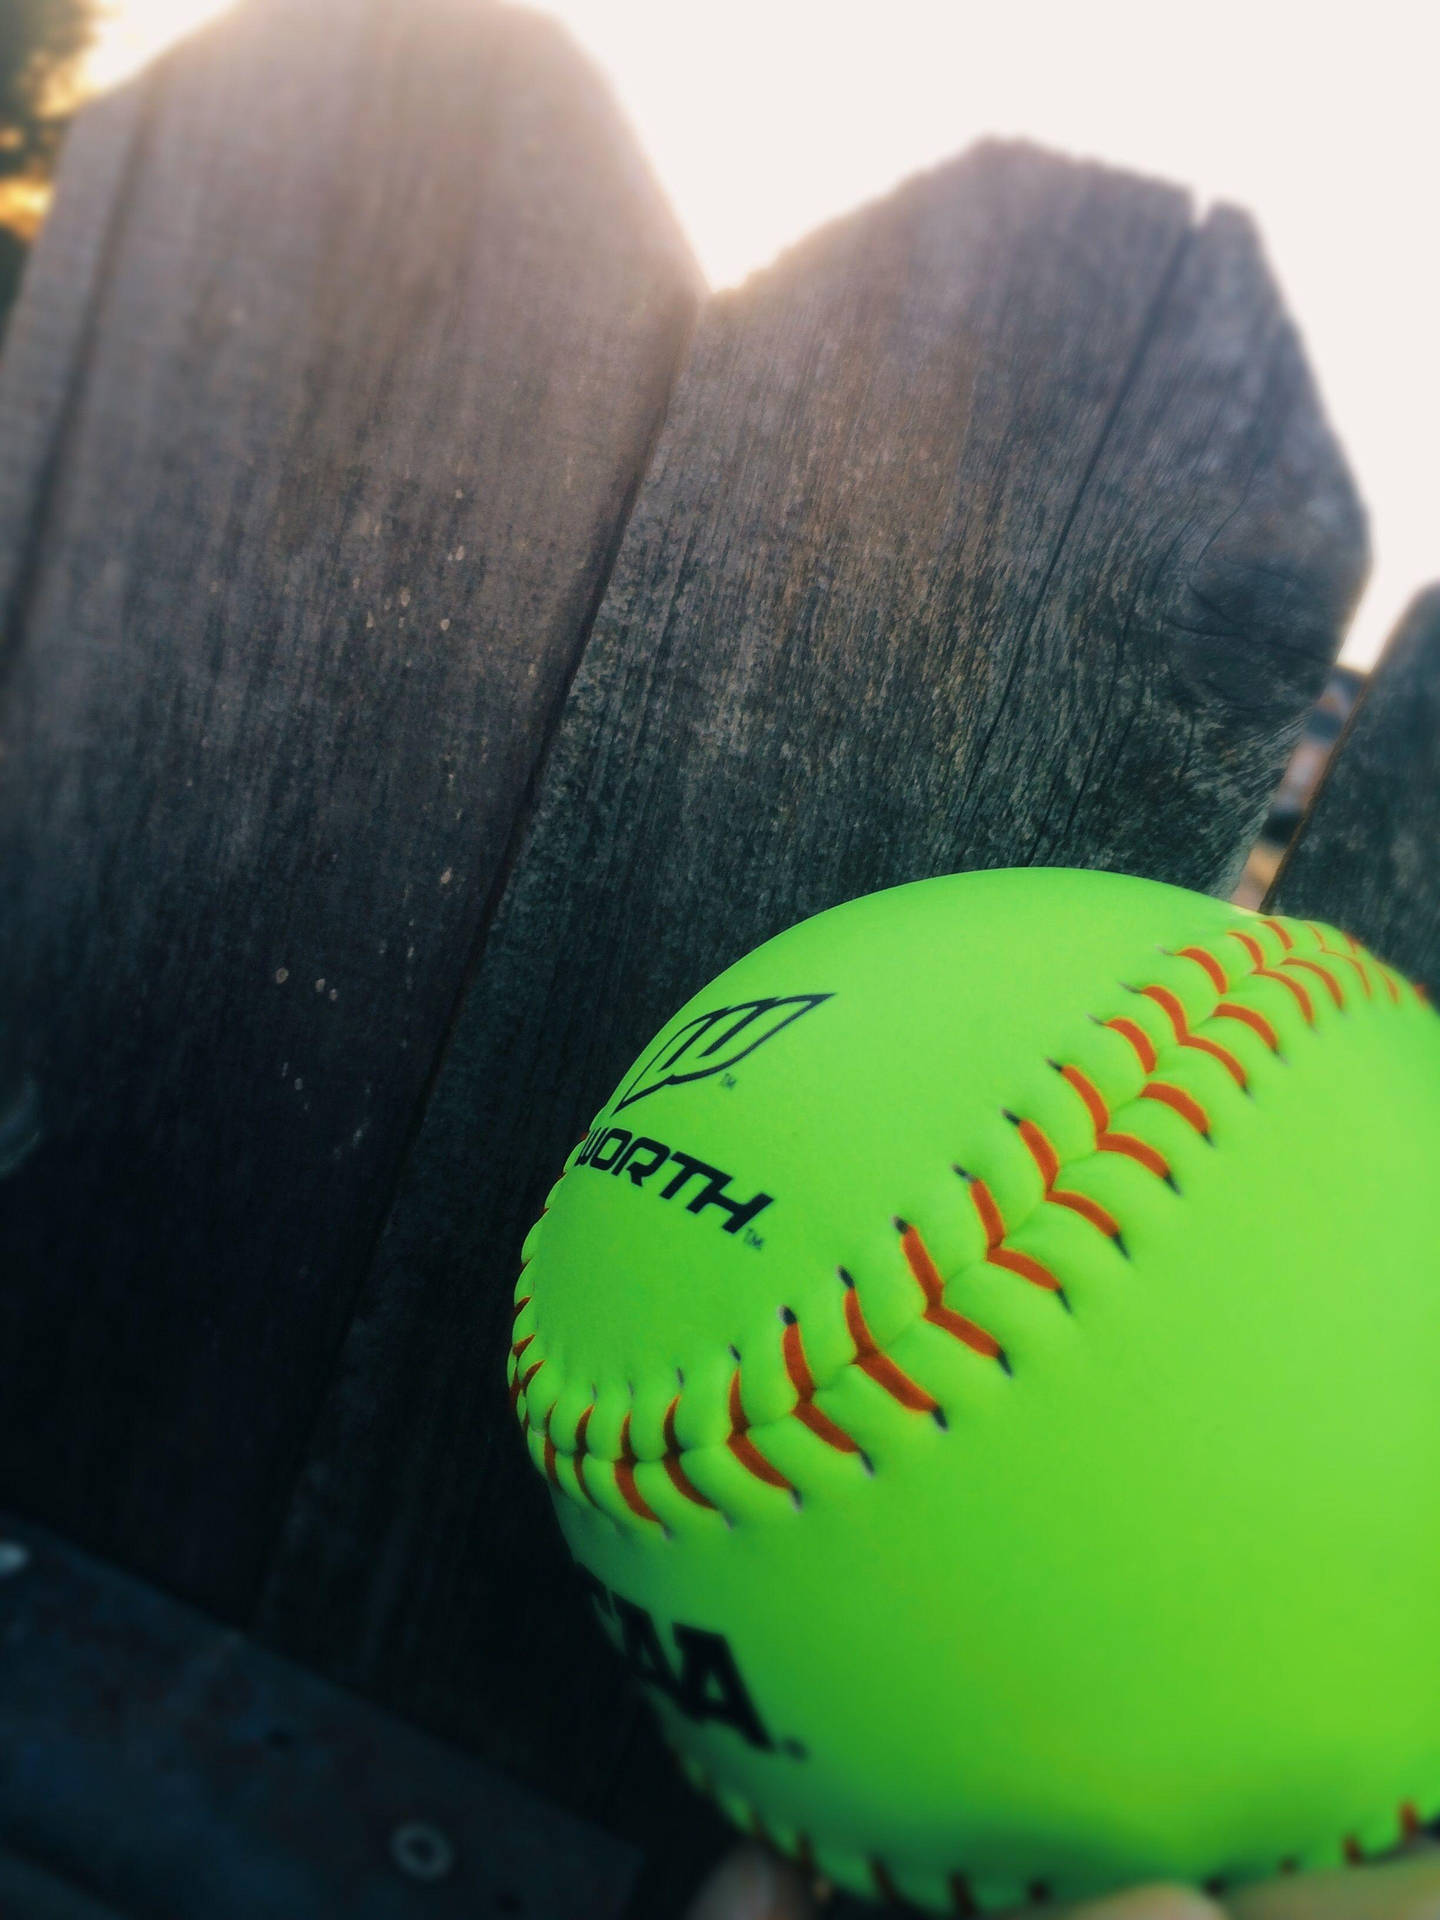 Awesome Softball On A Fence Wallpaper